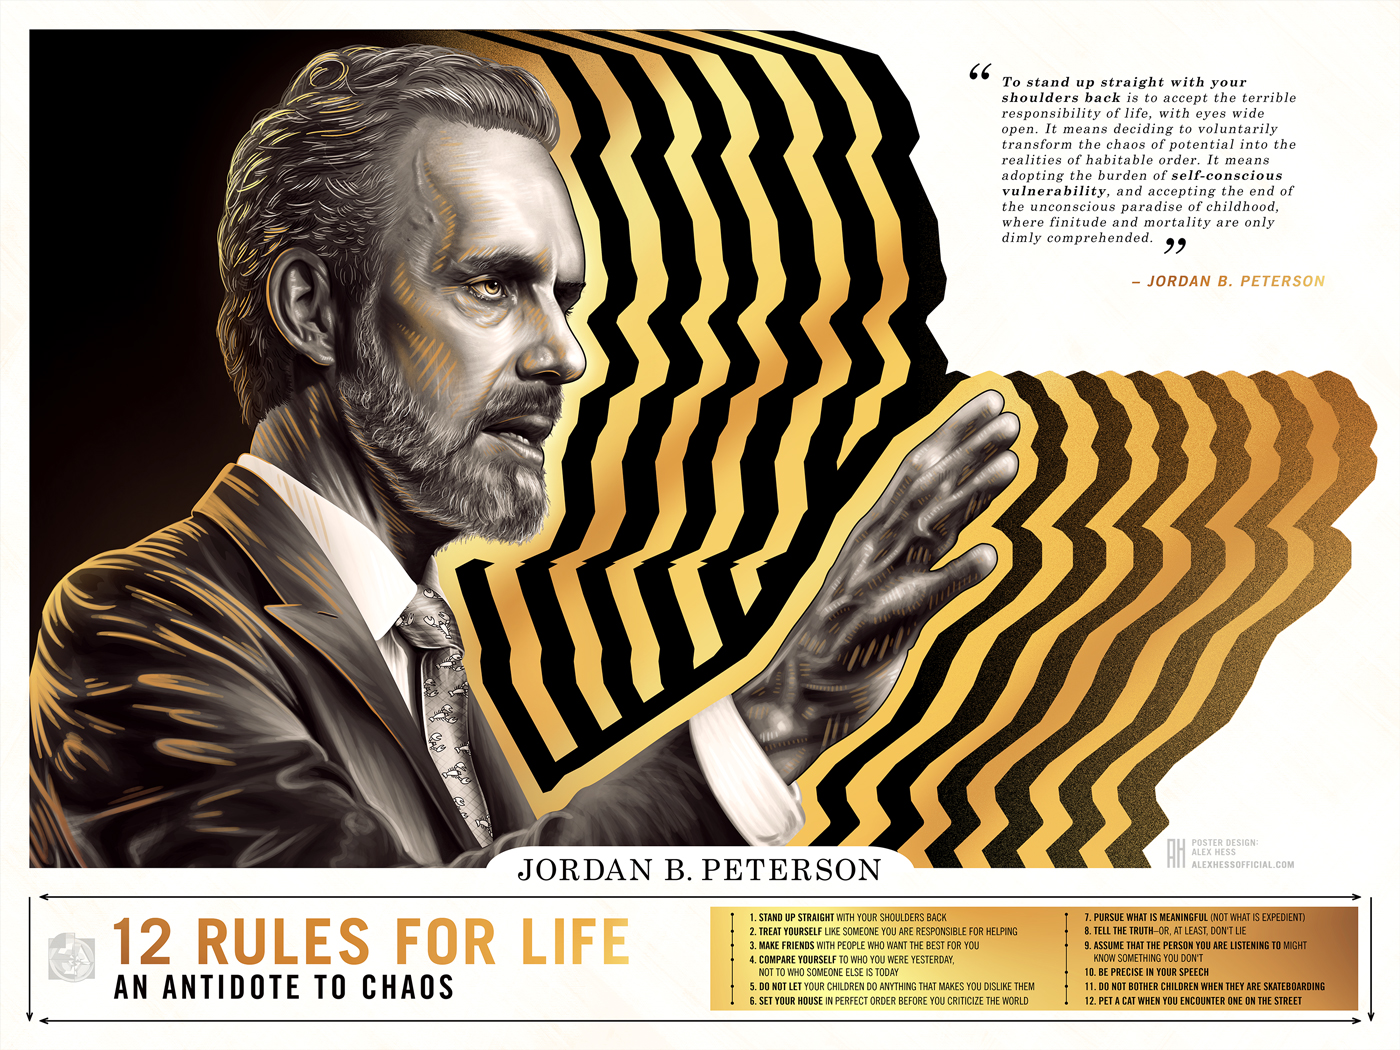 12 rules for life summary jordan peterson